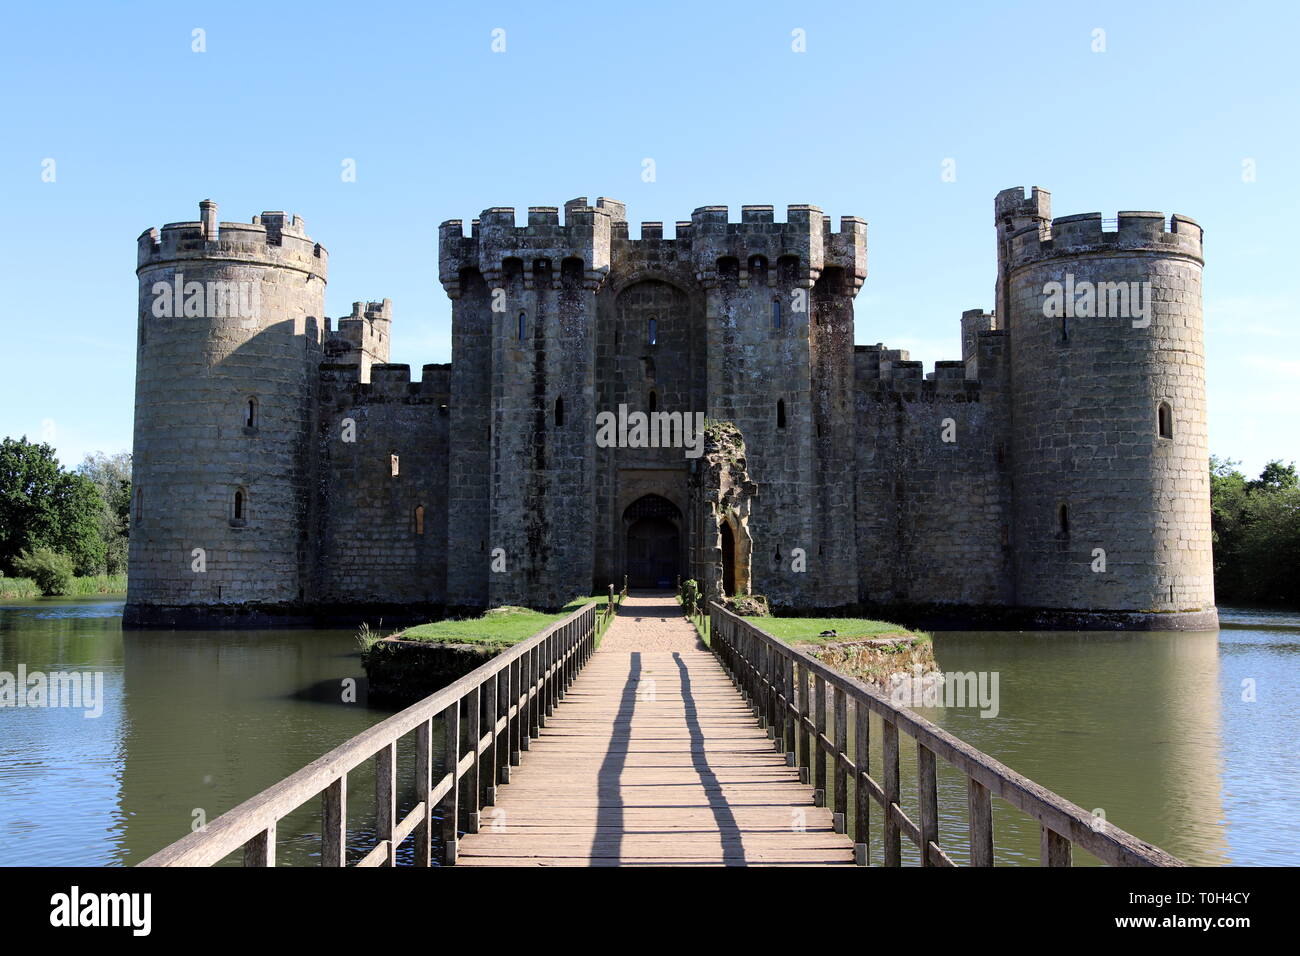 Bodiam Castle in East Sussex in England Stock Photo